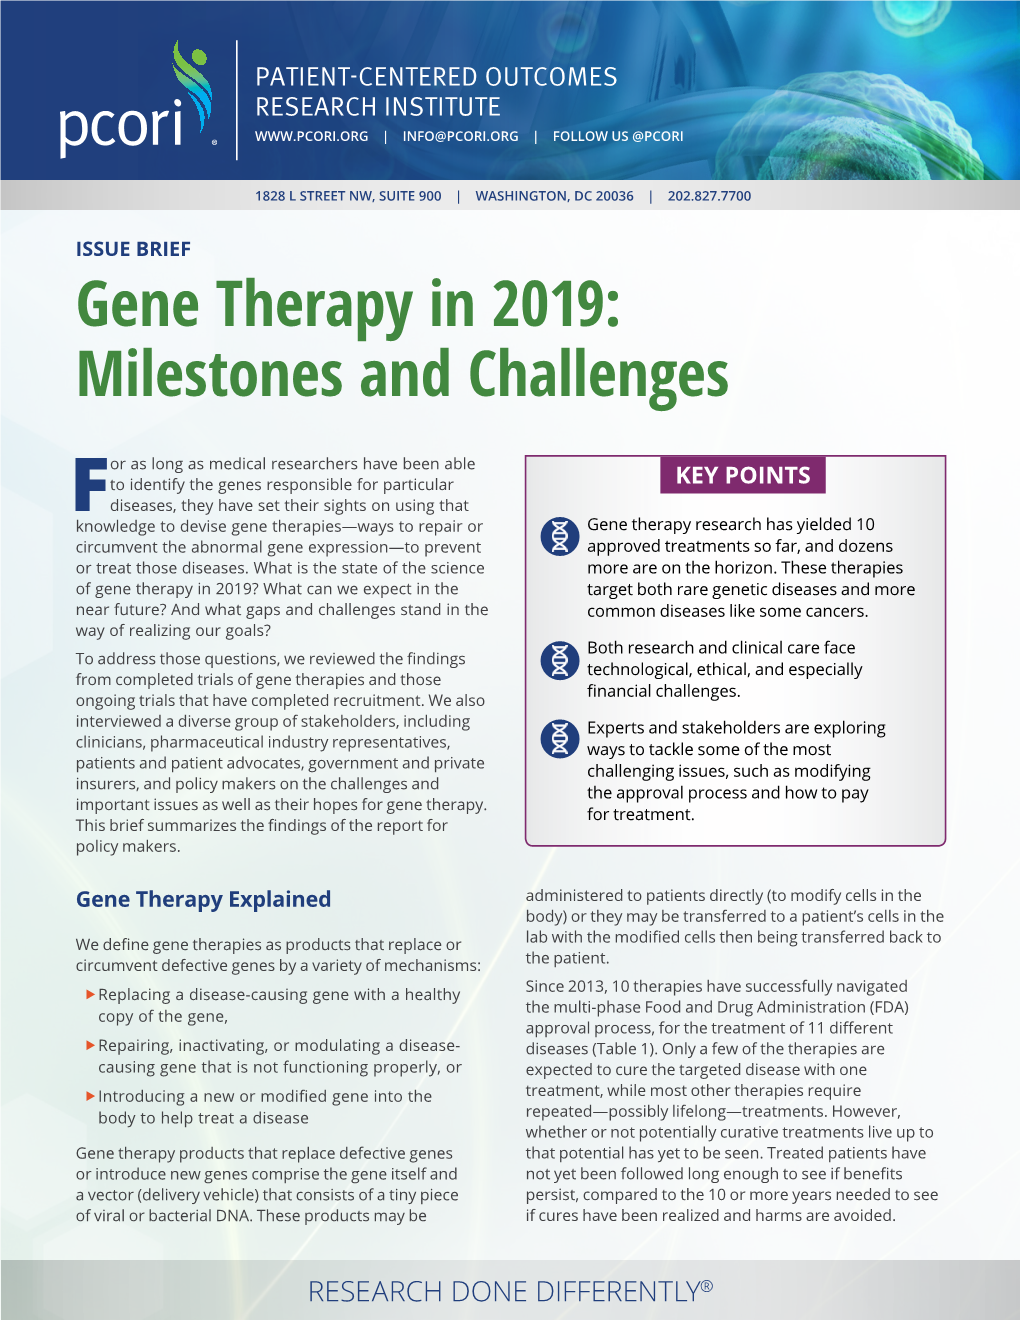 Issue Brief. Gene Therapy in 2019: Milestones and Challenges